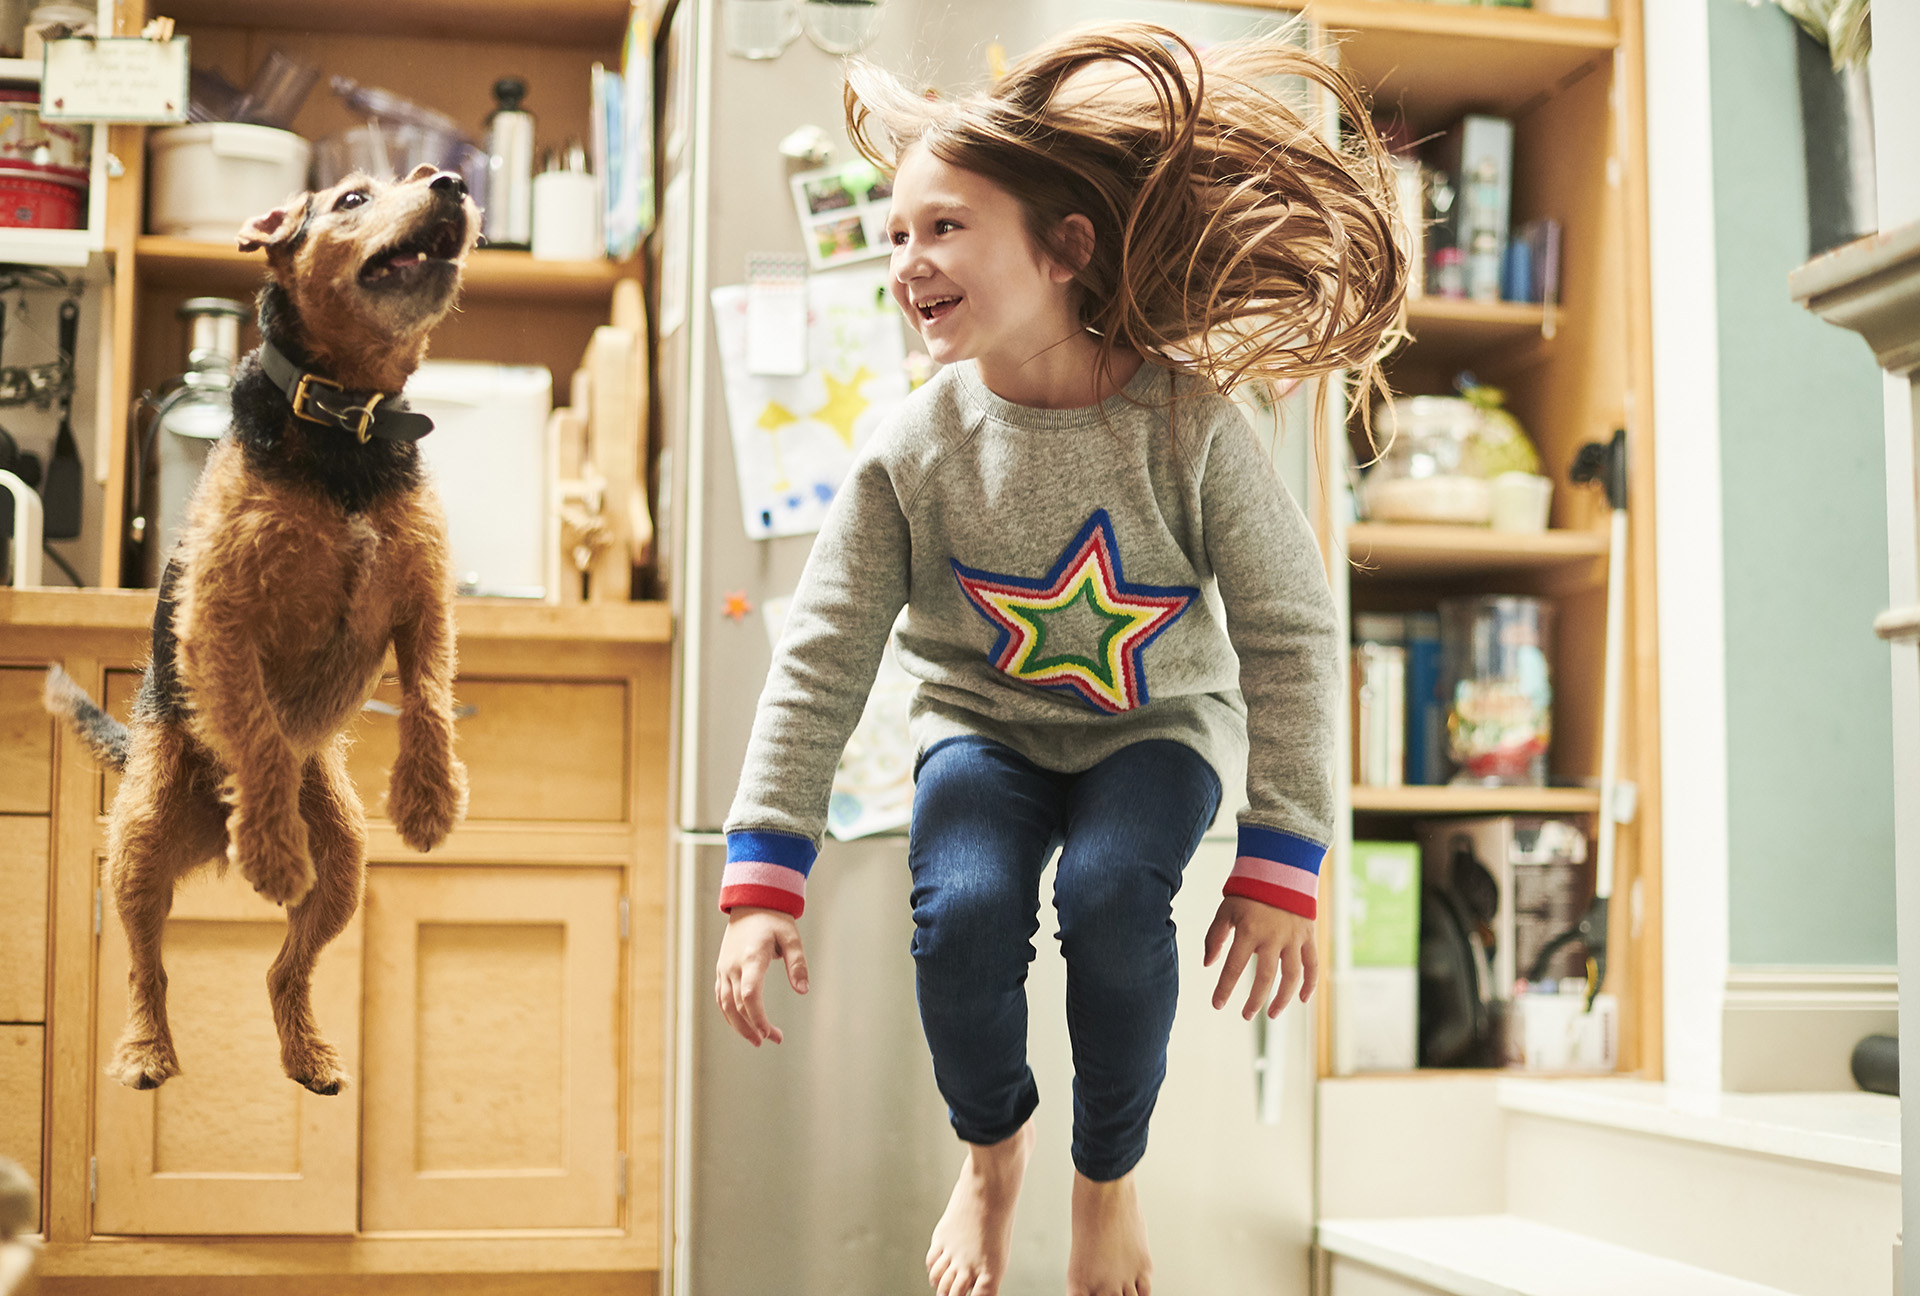 A young girl and her dog jumping in their kitchen